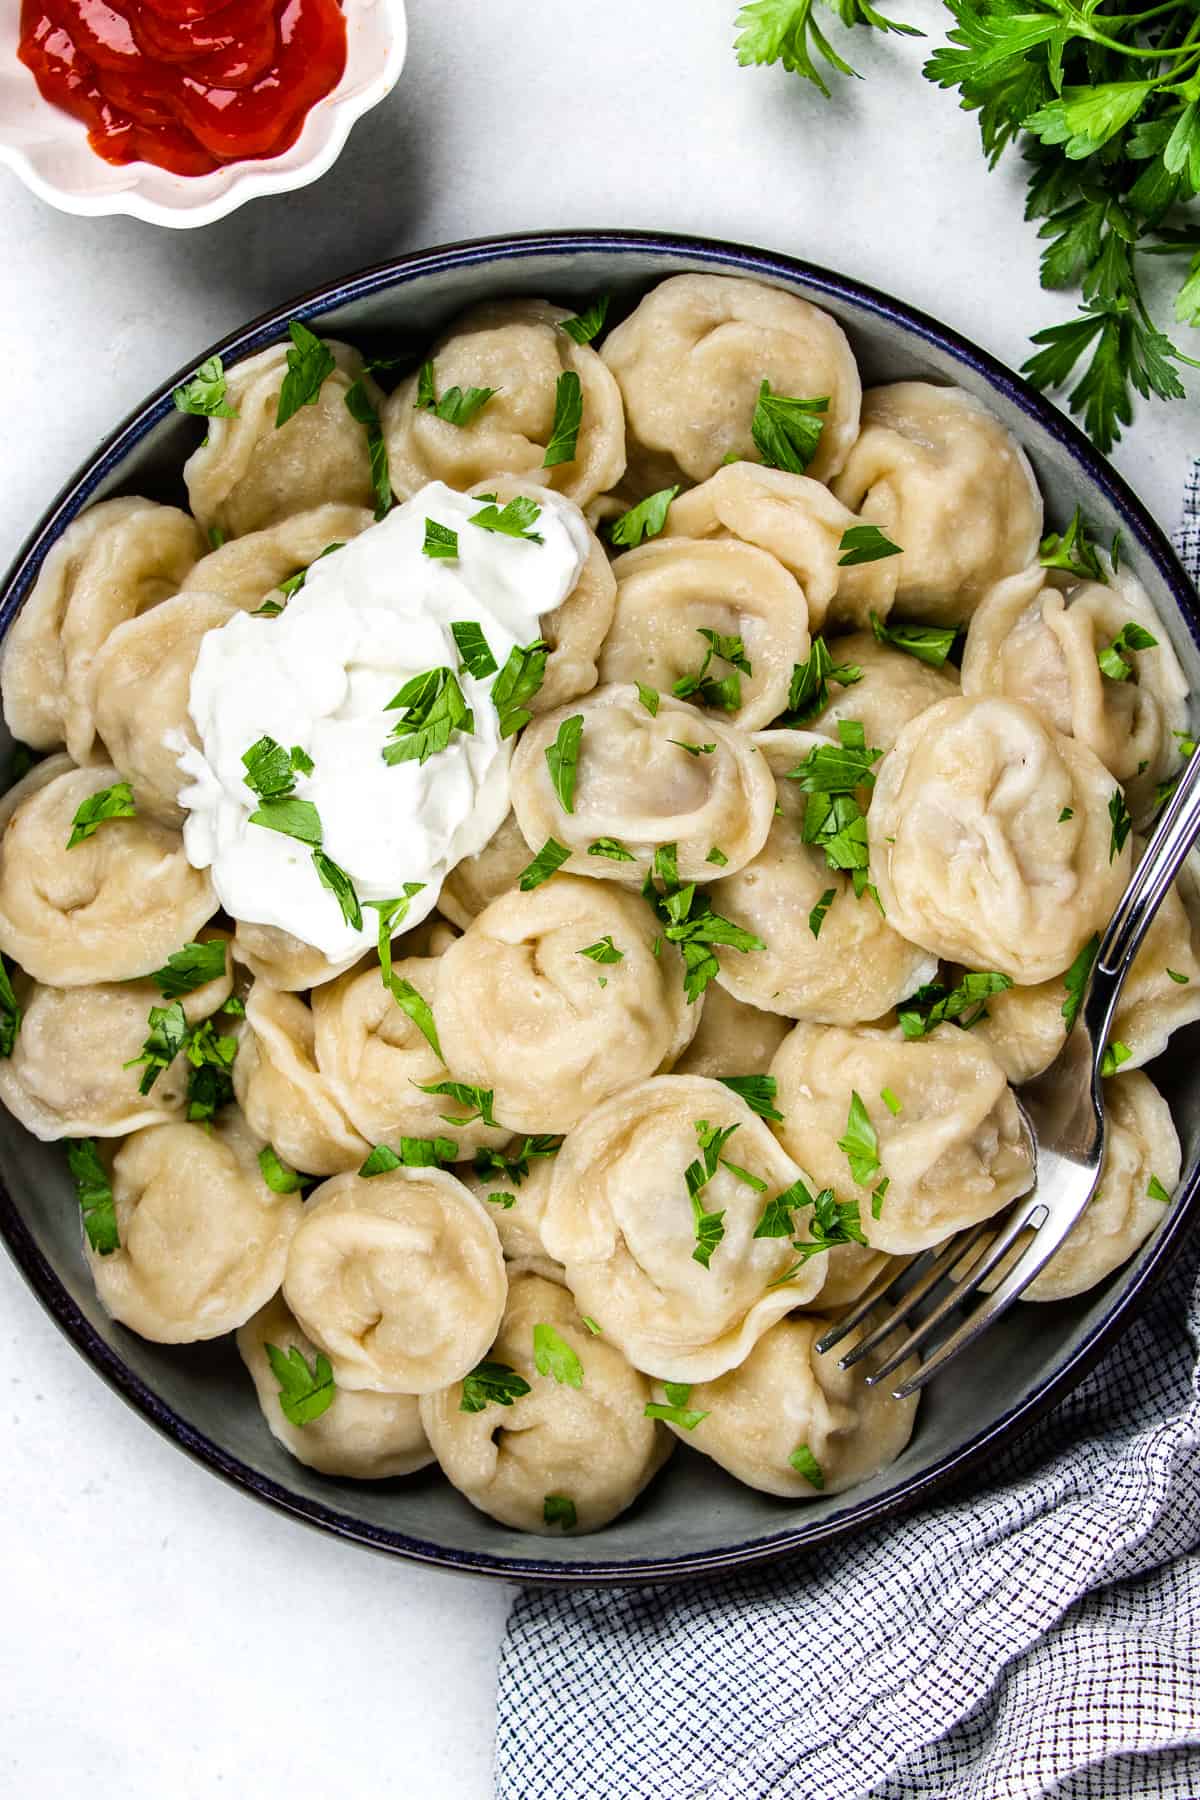 Pelmeni, topped with dill and sour cream, in a dark blue bowl.